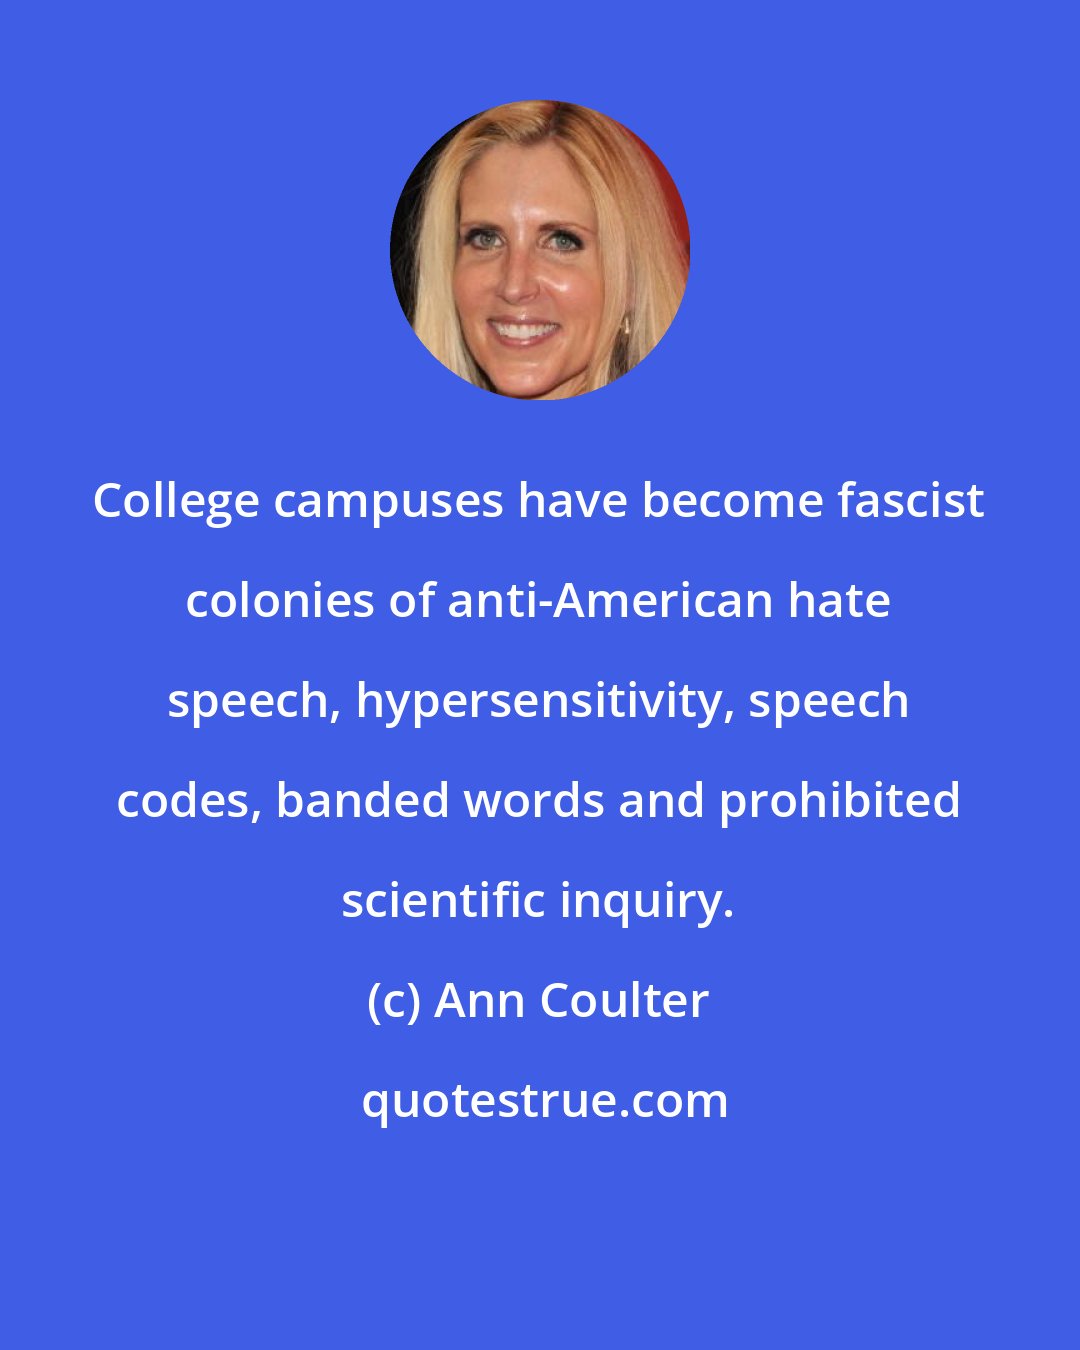 Ann Coulter: College campuses have become fascist colonies of anti-American hate speech, hypersensitivity, speech codes, banded words and prohibited scientific inquiry.